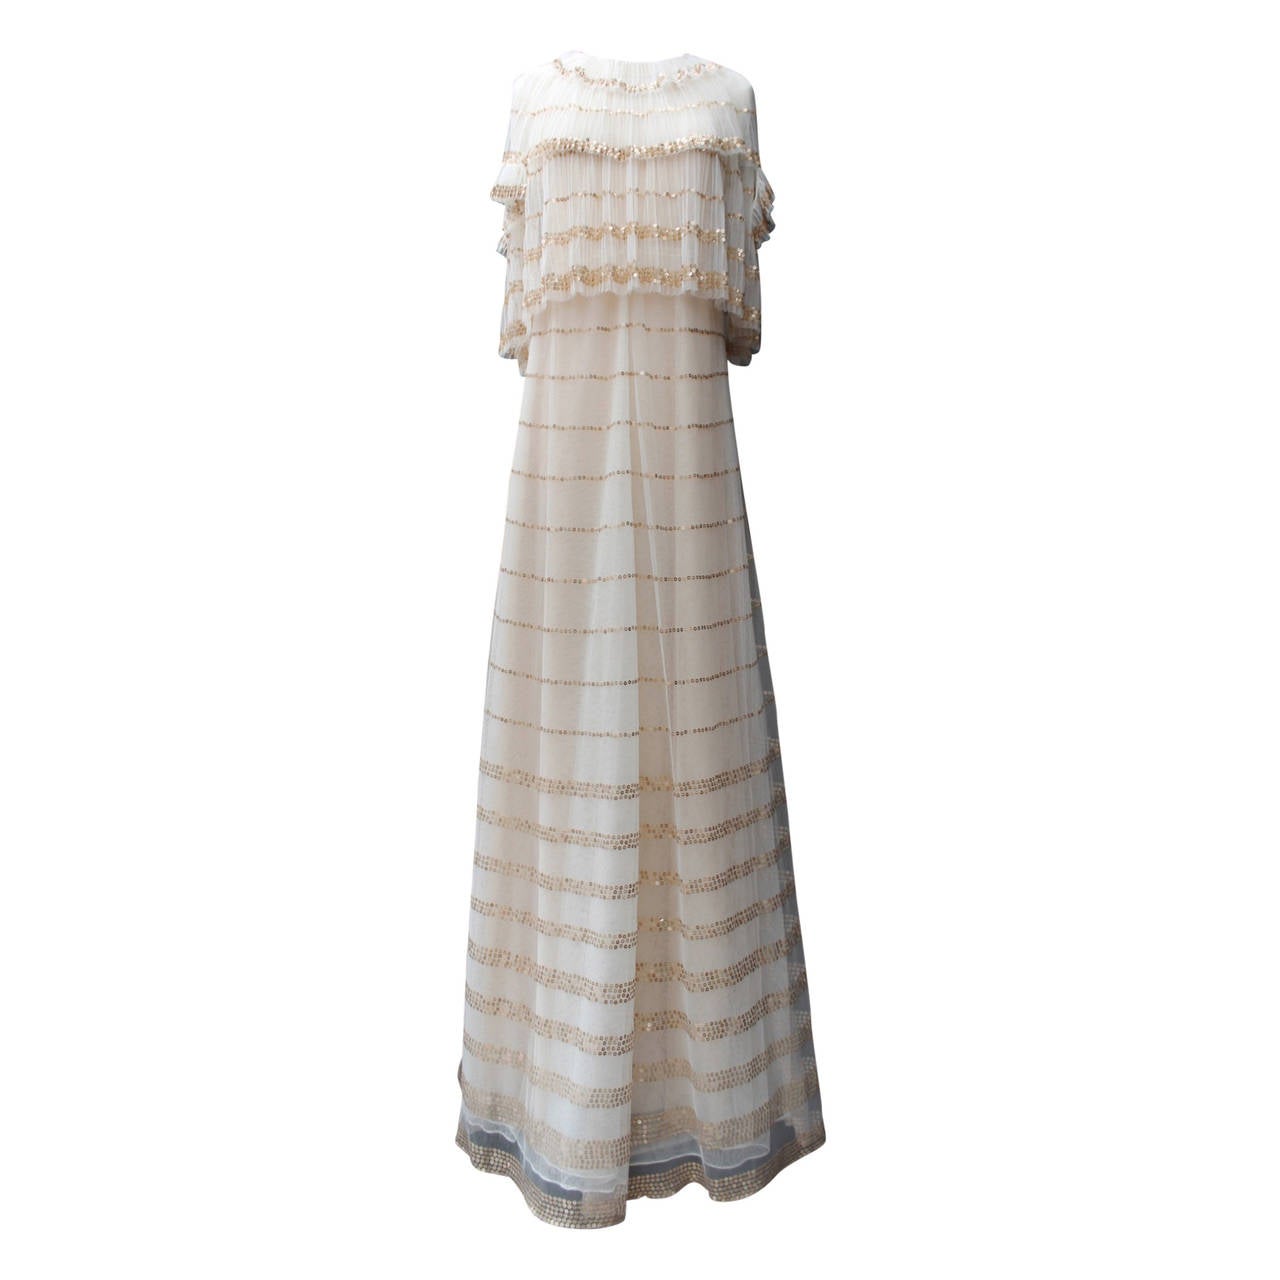 White Tulle and Gold Sequins Long Chloe Dress, 2000s at 1stdibs